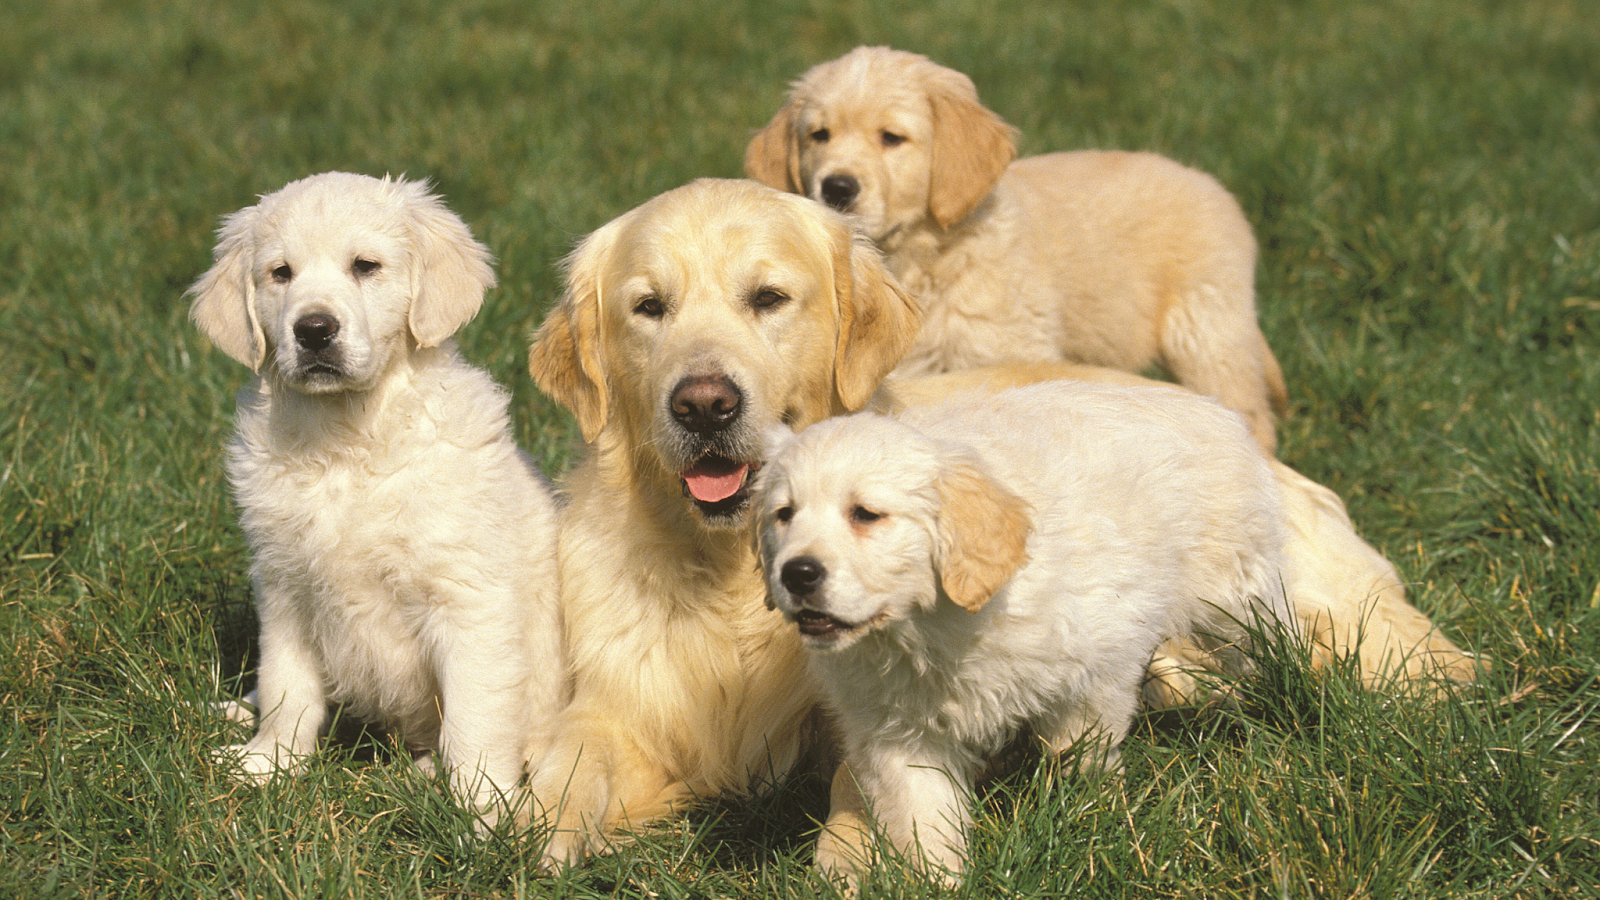 Golden Retrievers are prone to health issues such as Hip Dysplasia, Elbow Dysplasia, Cancer and Skin Allergies. 